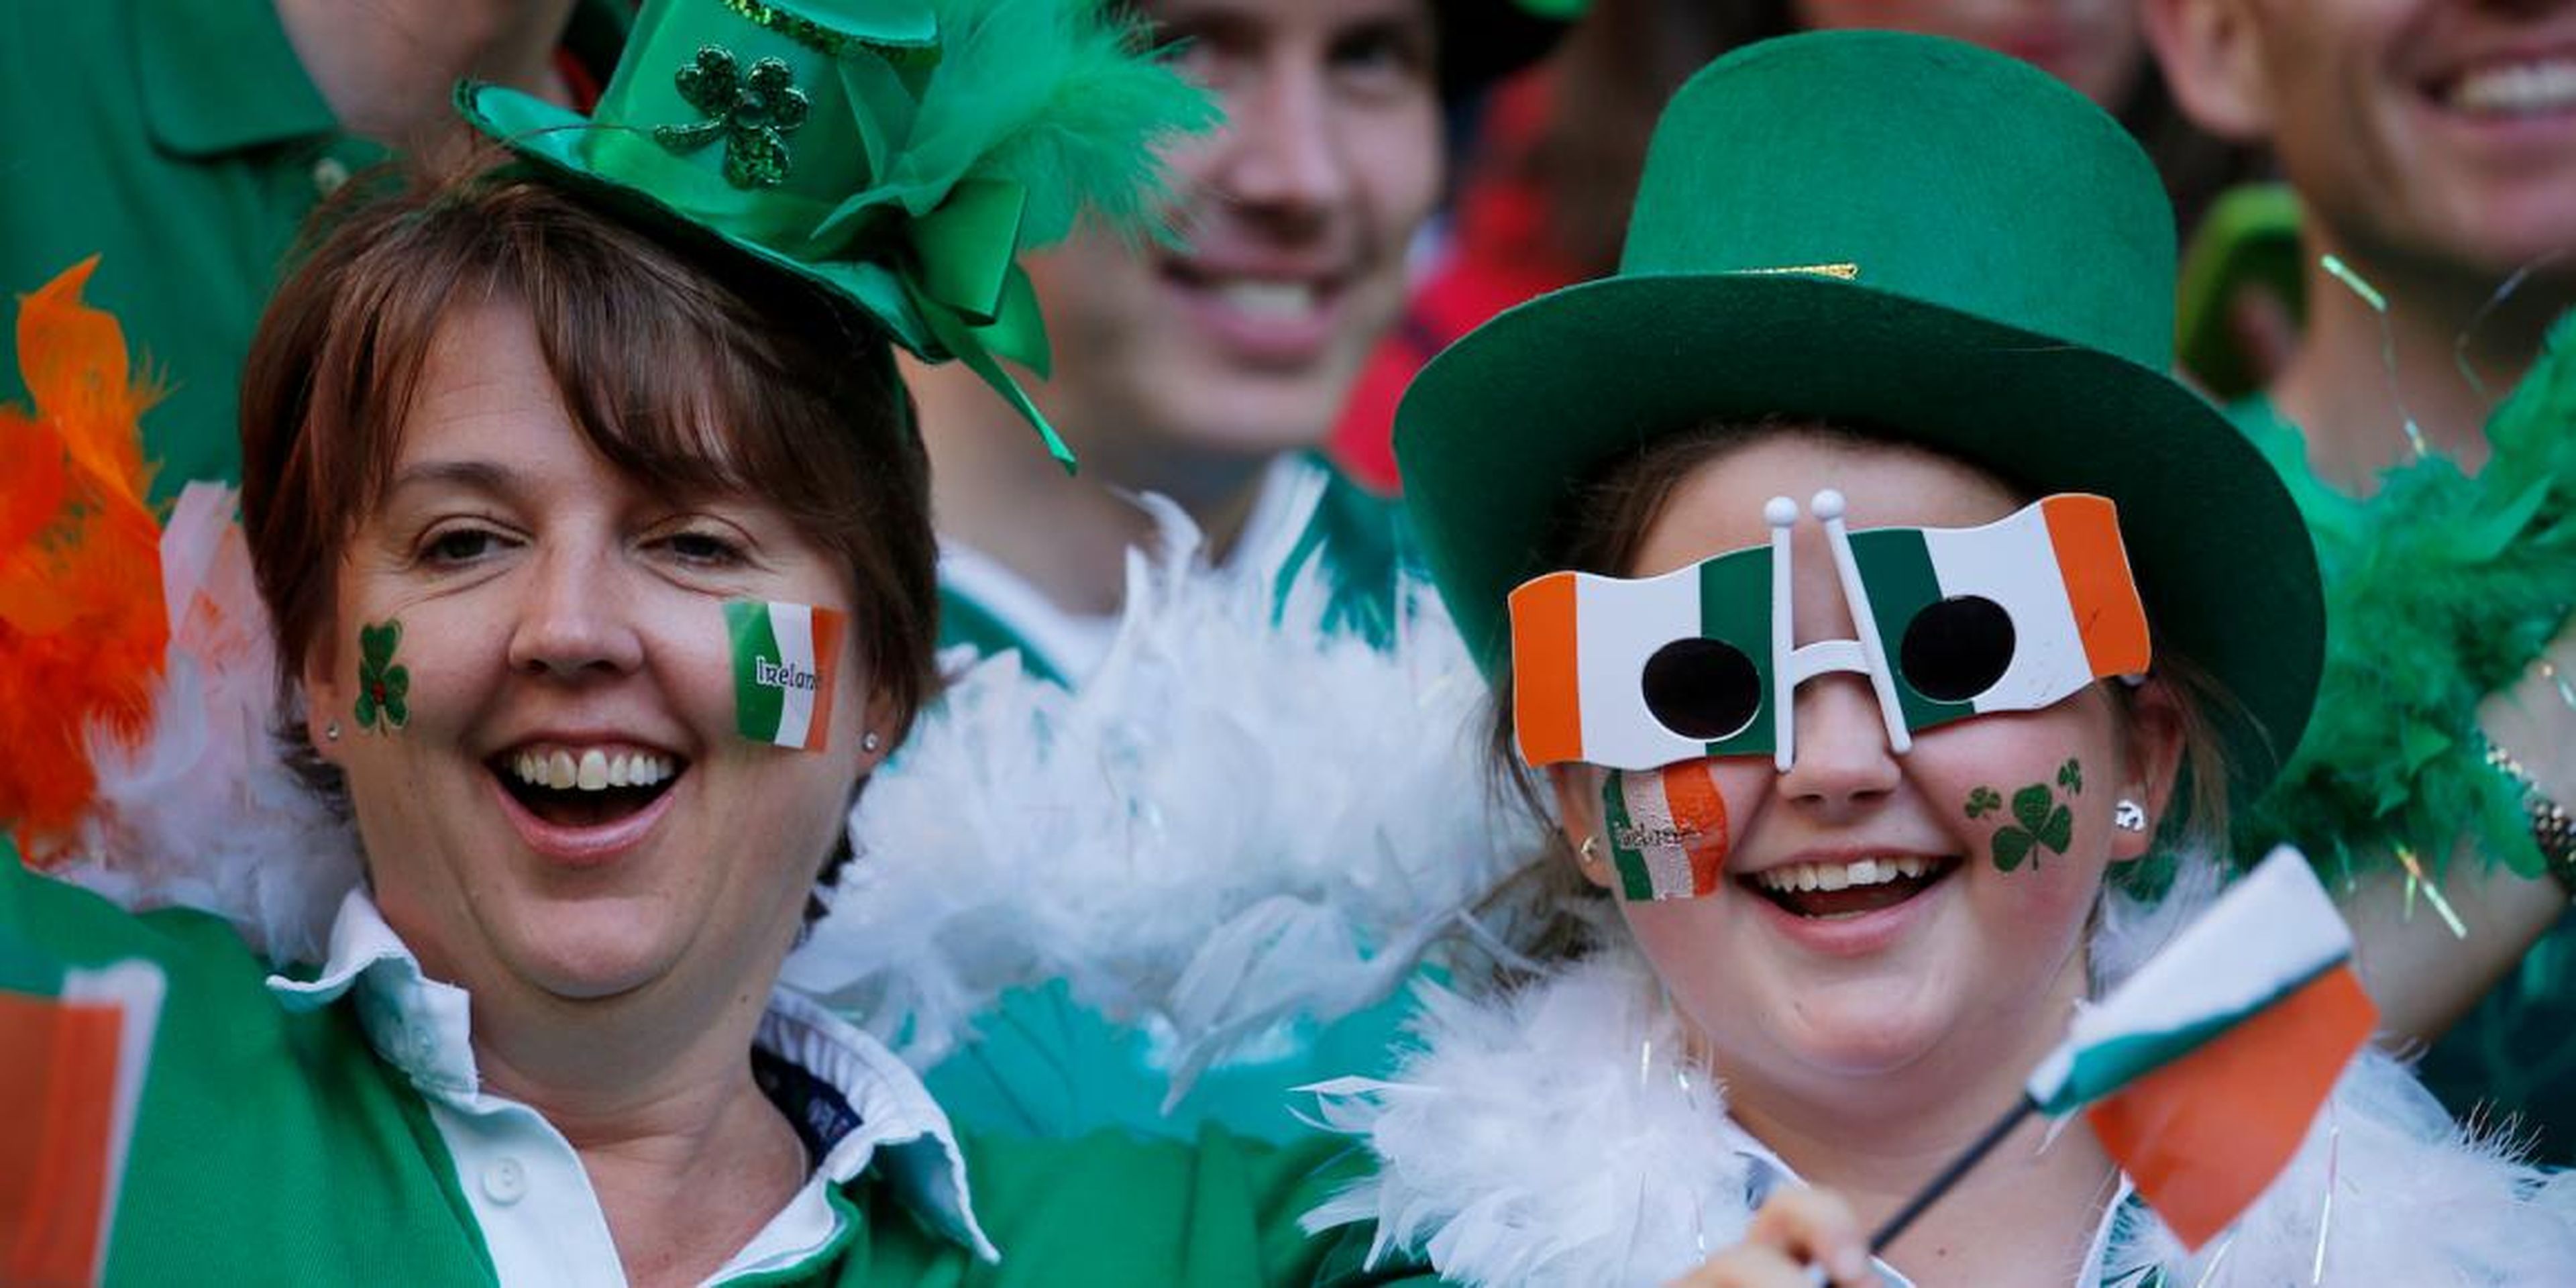 Ireland fans at the Rugby World Cup on September 27, 2015.